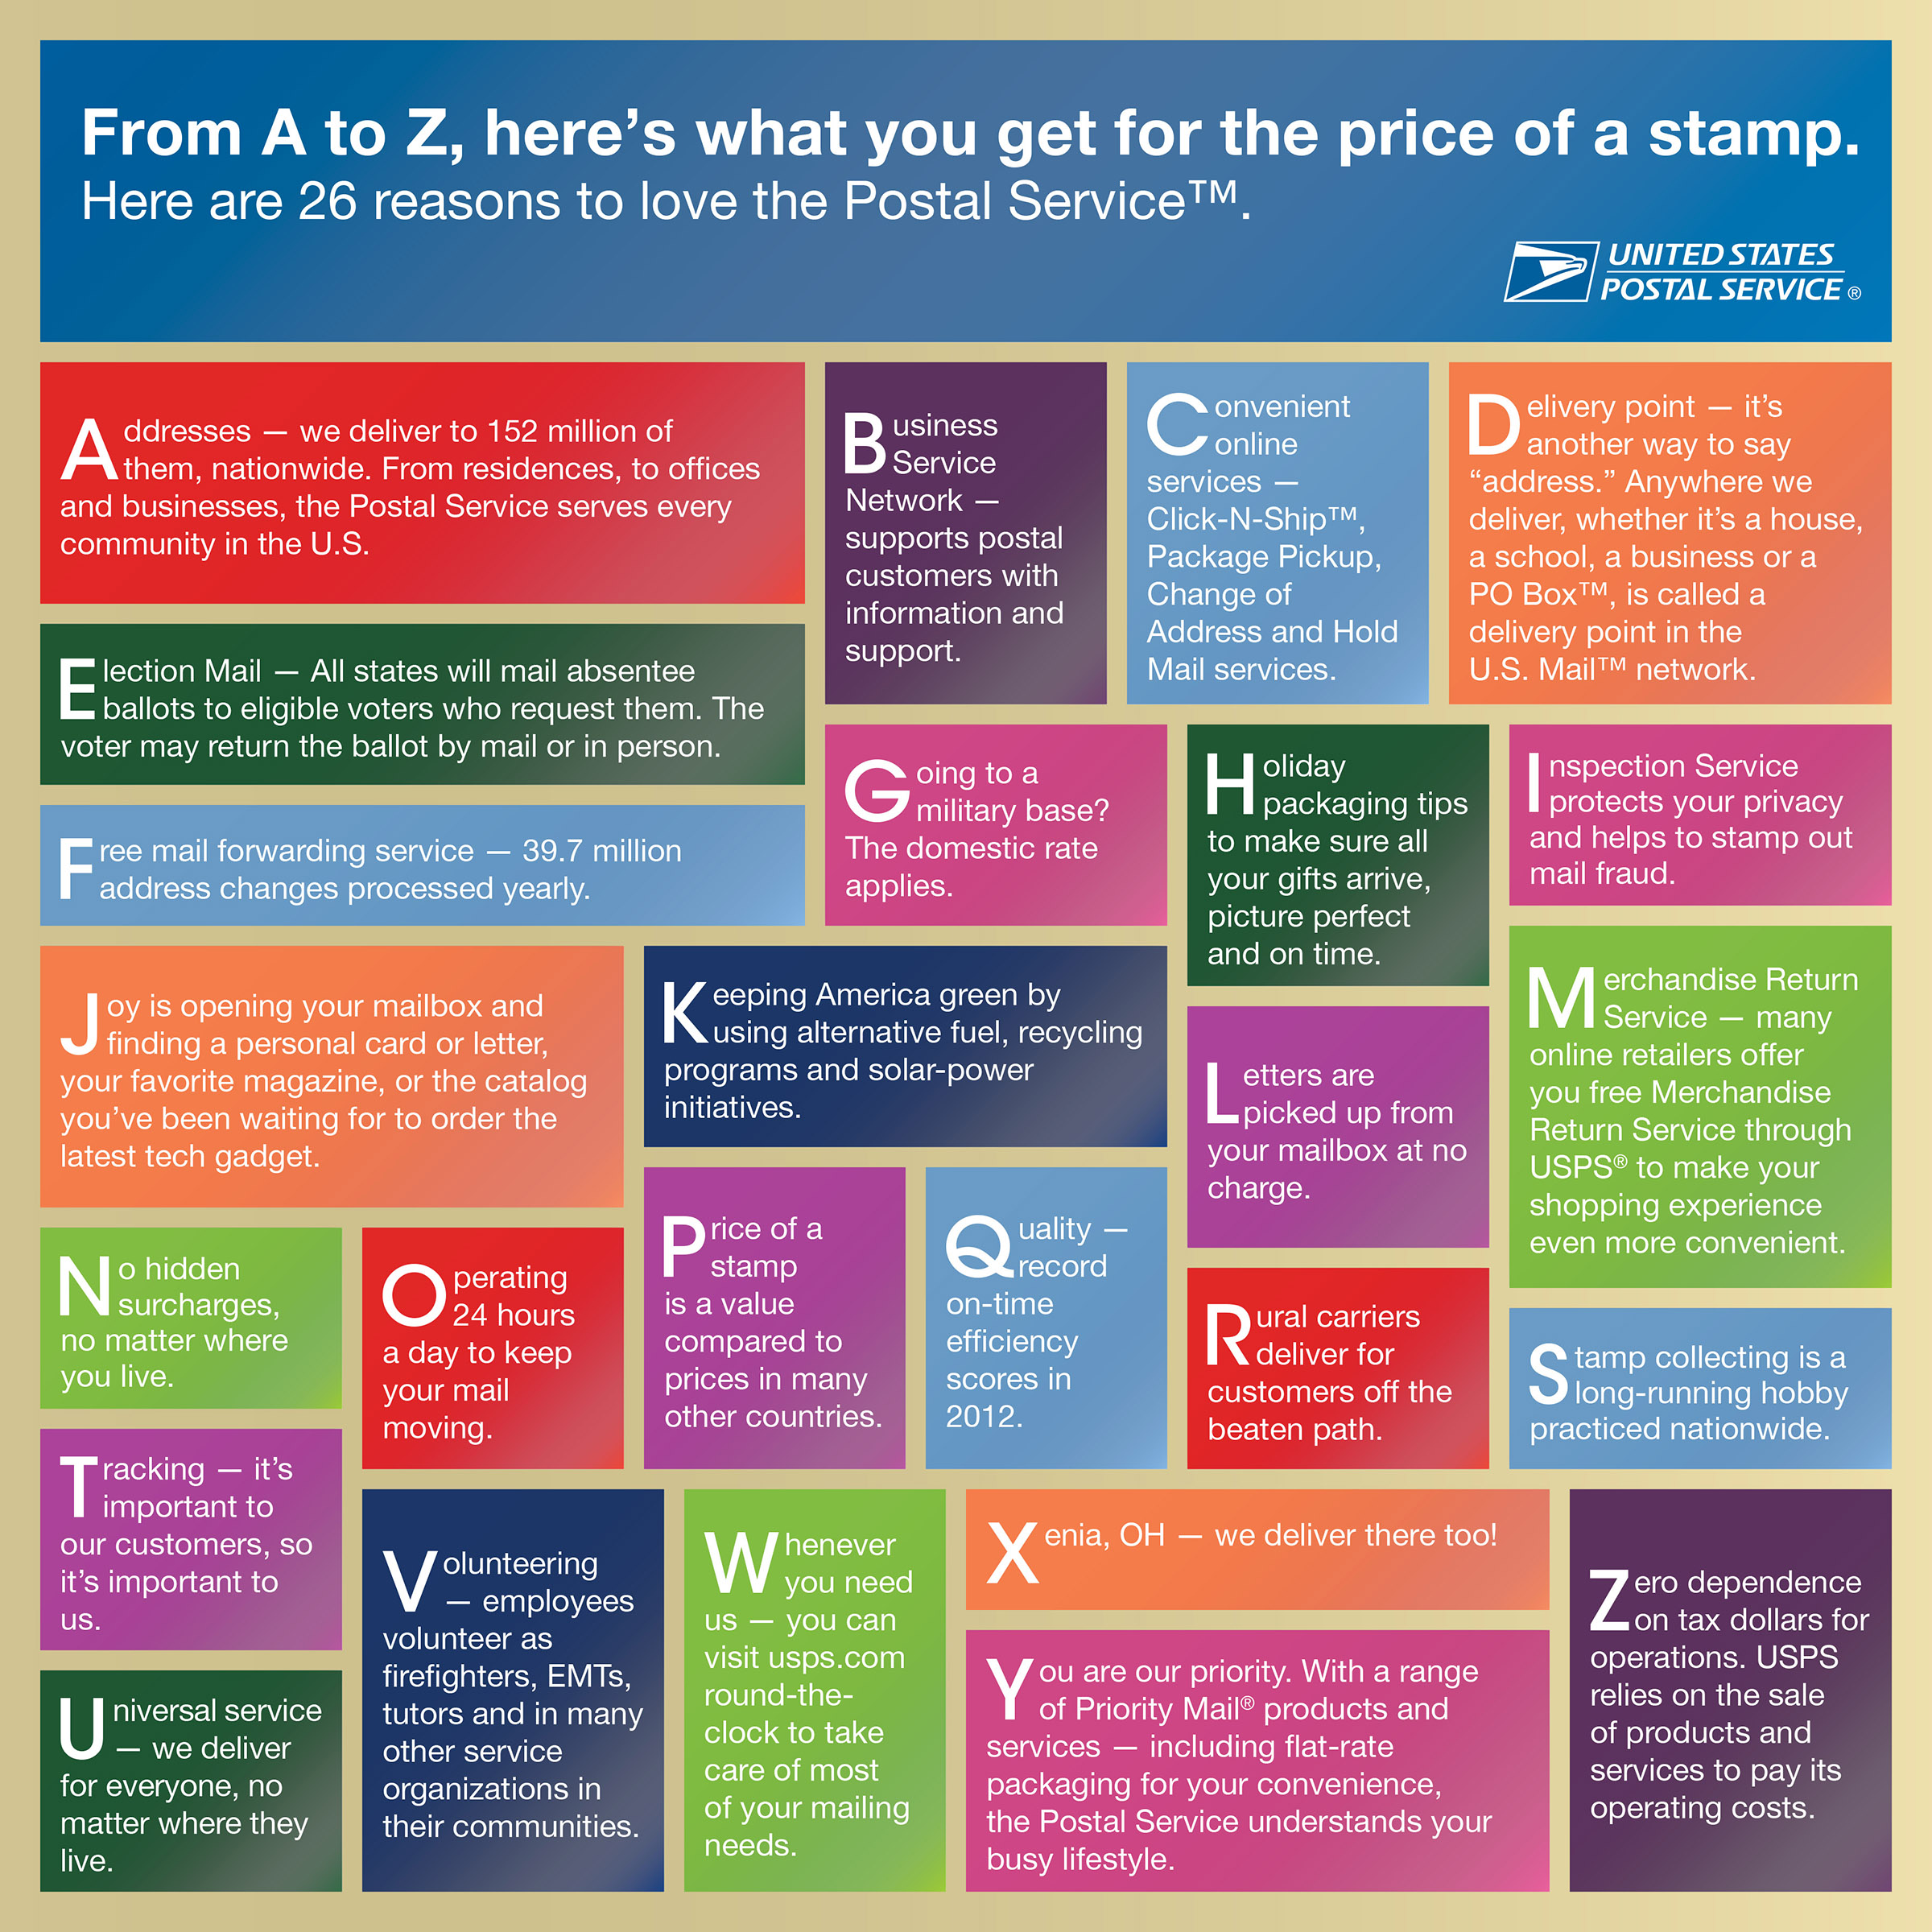 What is the price of a stamp?